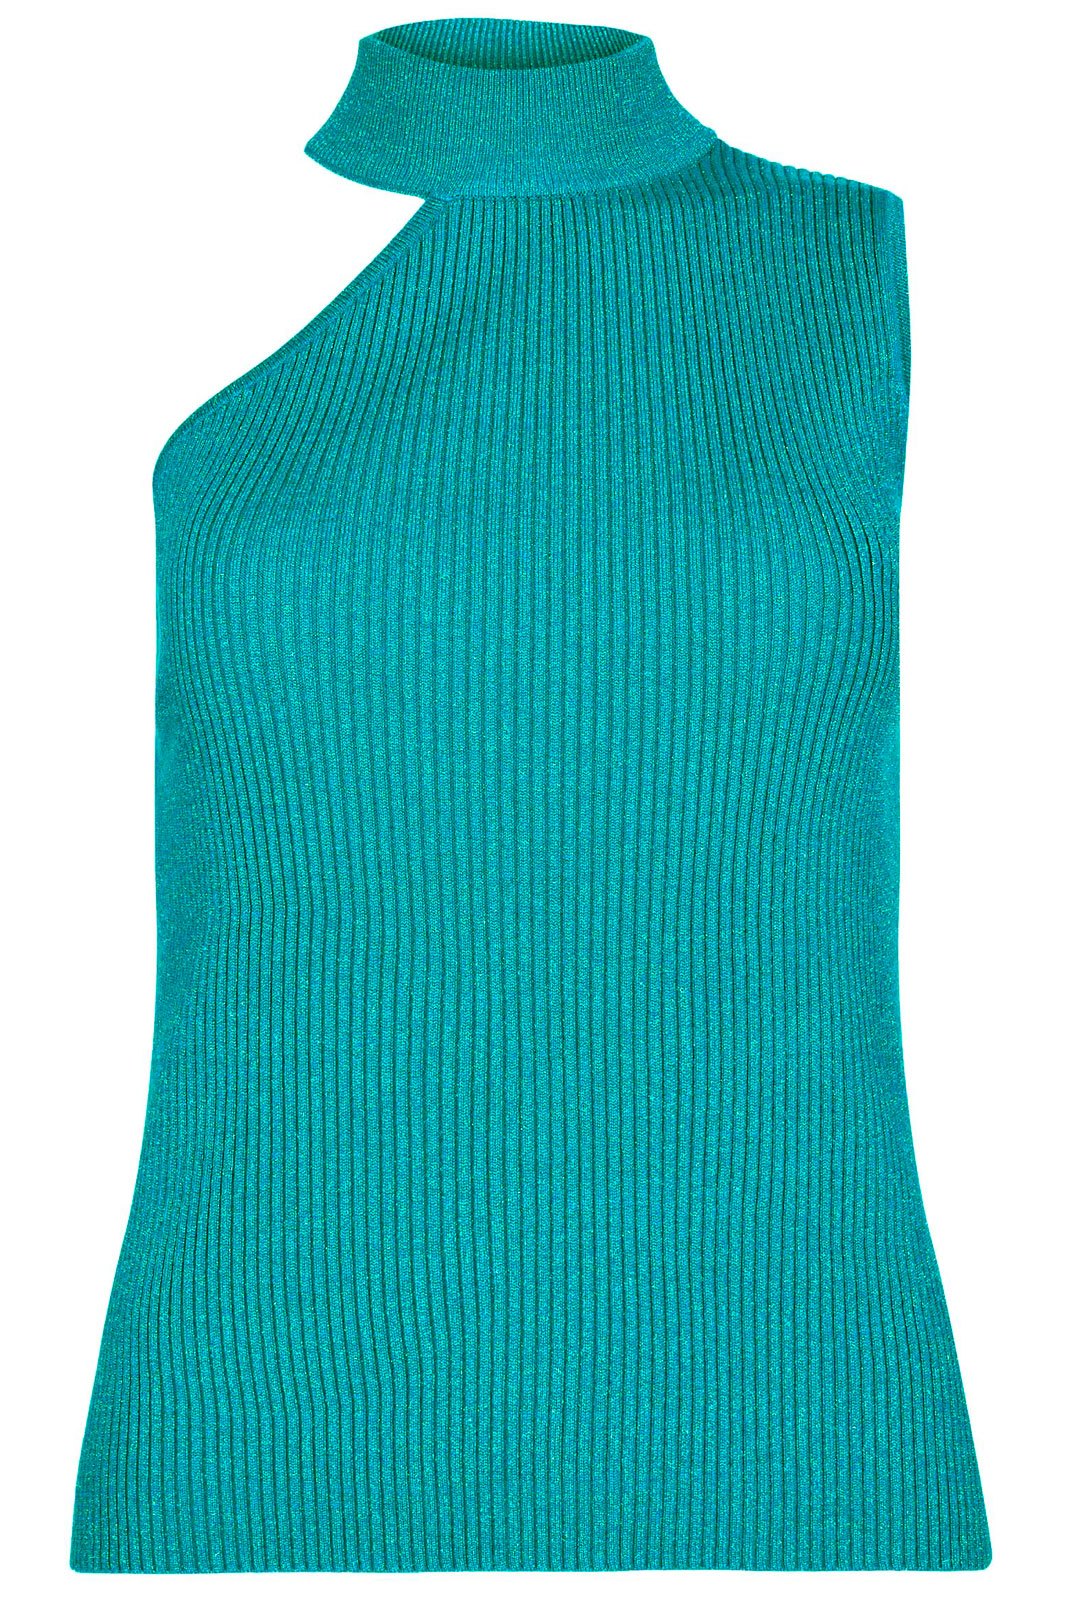 Co´couture - Badu Asym Rib Top - Turquoise Toppe 